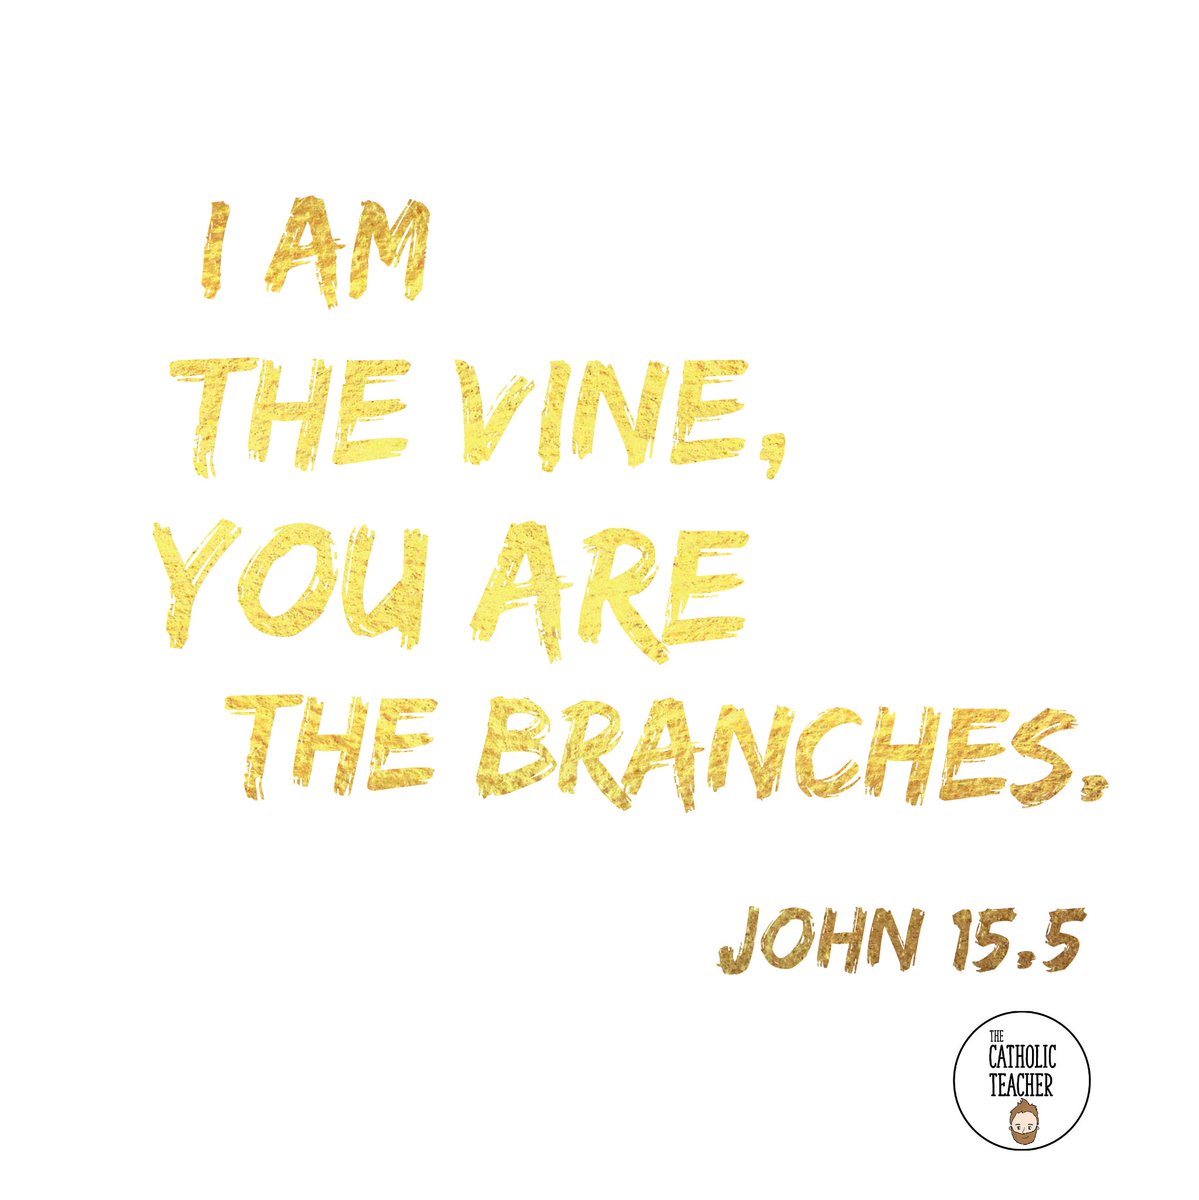 Beautiful imagery of Jesus as the vine and all of us as the branches who receive life from this vine..

#vineandbranches #jesus #god #faith #catholic #catholiclife #teacher #teacherlife #catholicidentity #thecatholicteacher